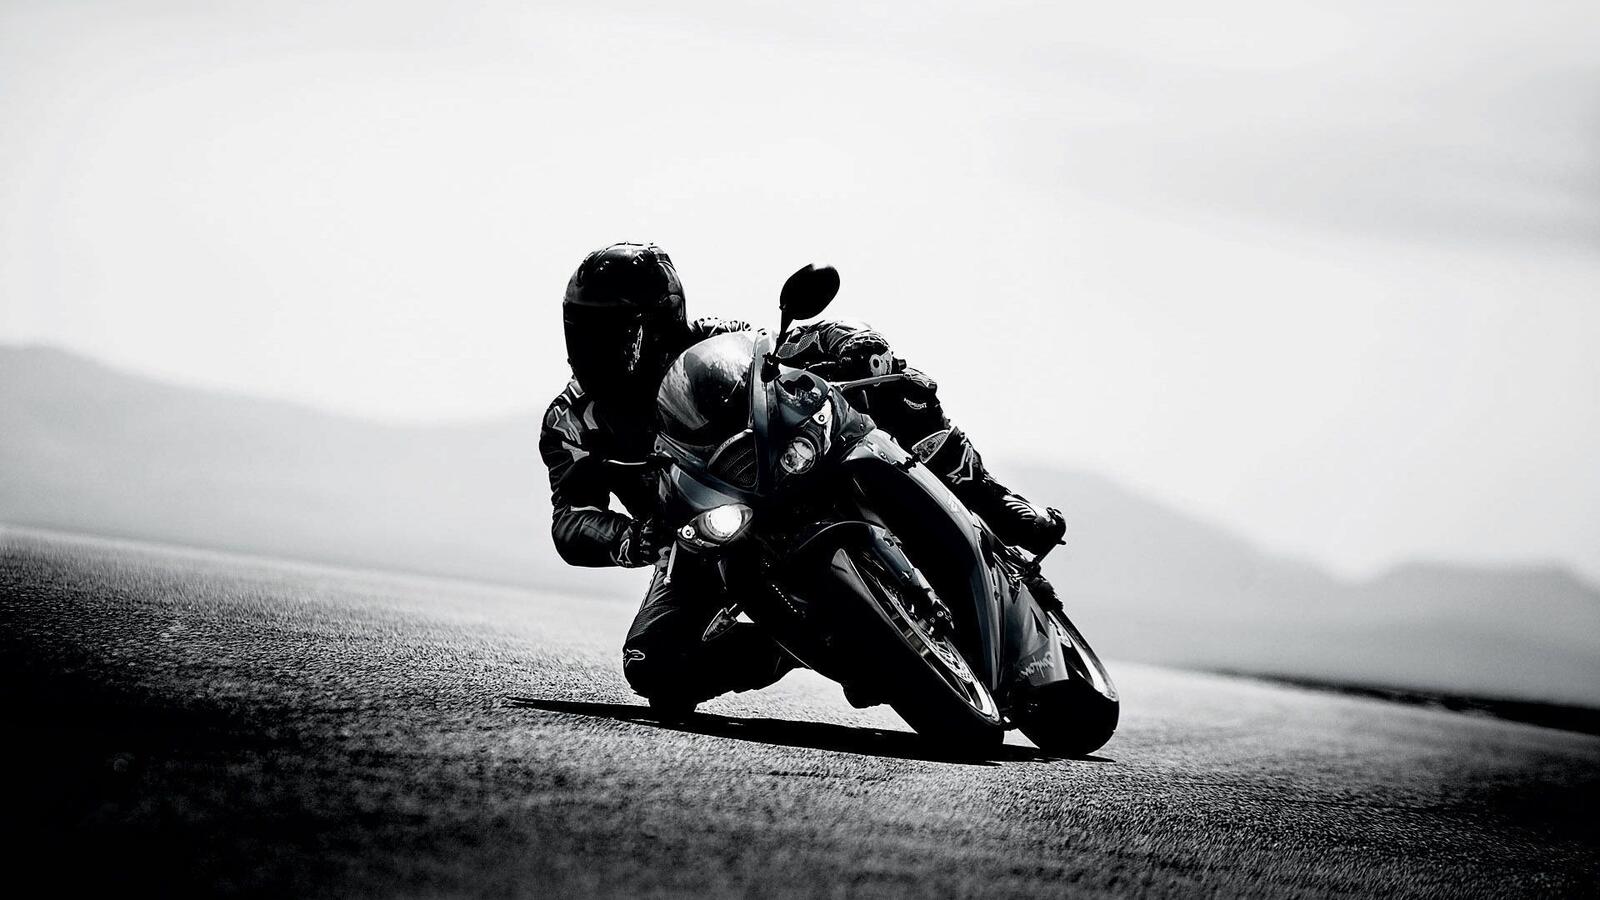 Wallpapers motorcycles motorcycle monochrome on the desktop